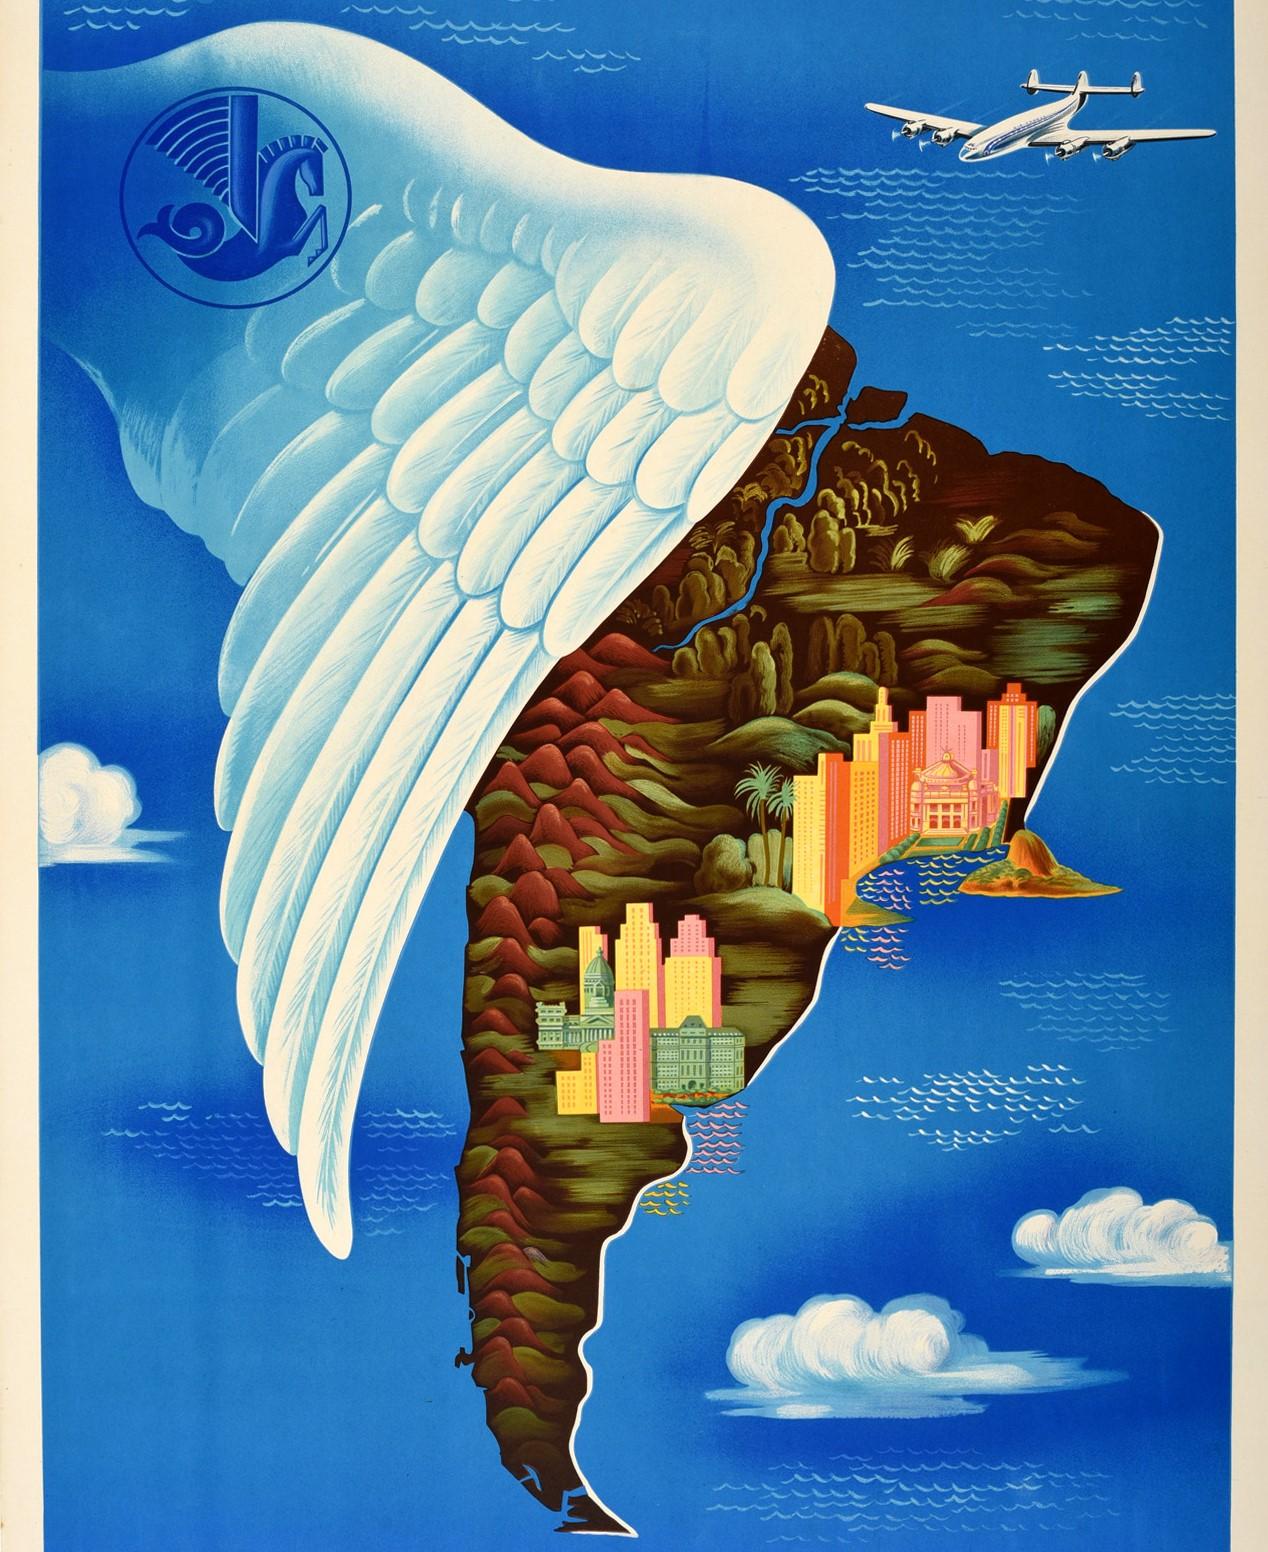 French Original Vintage Travel Poster By Boucher For Air France South America Del Sur